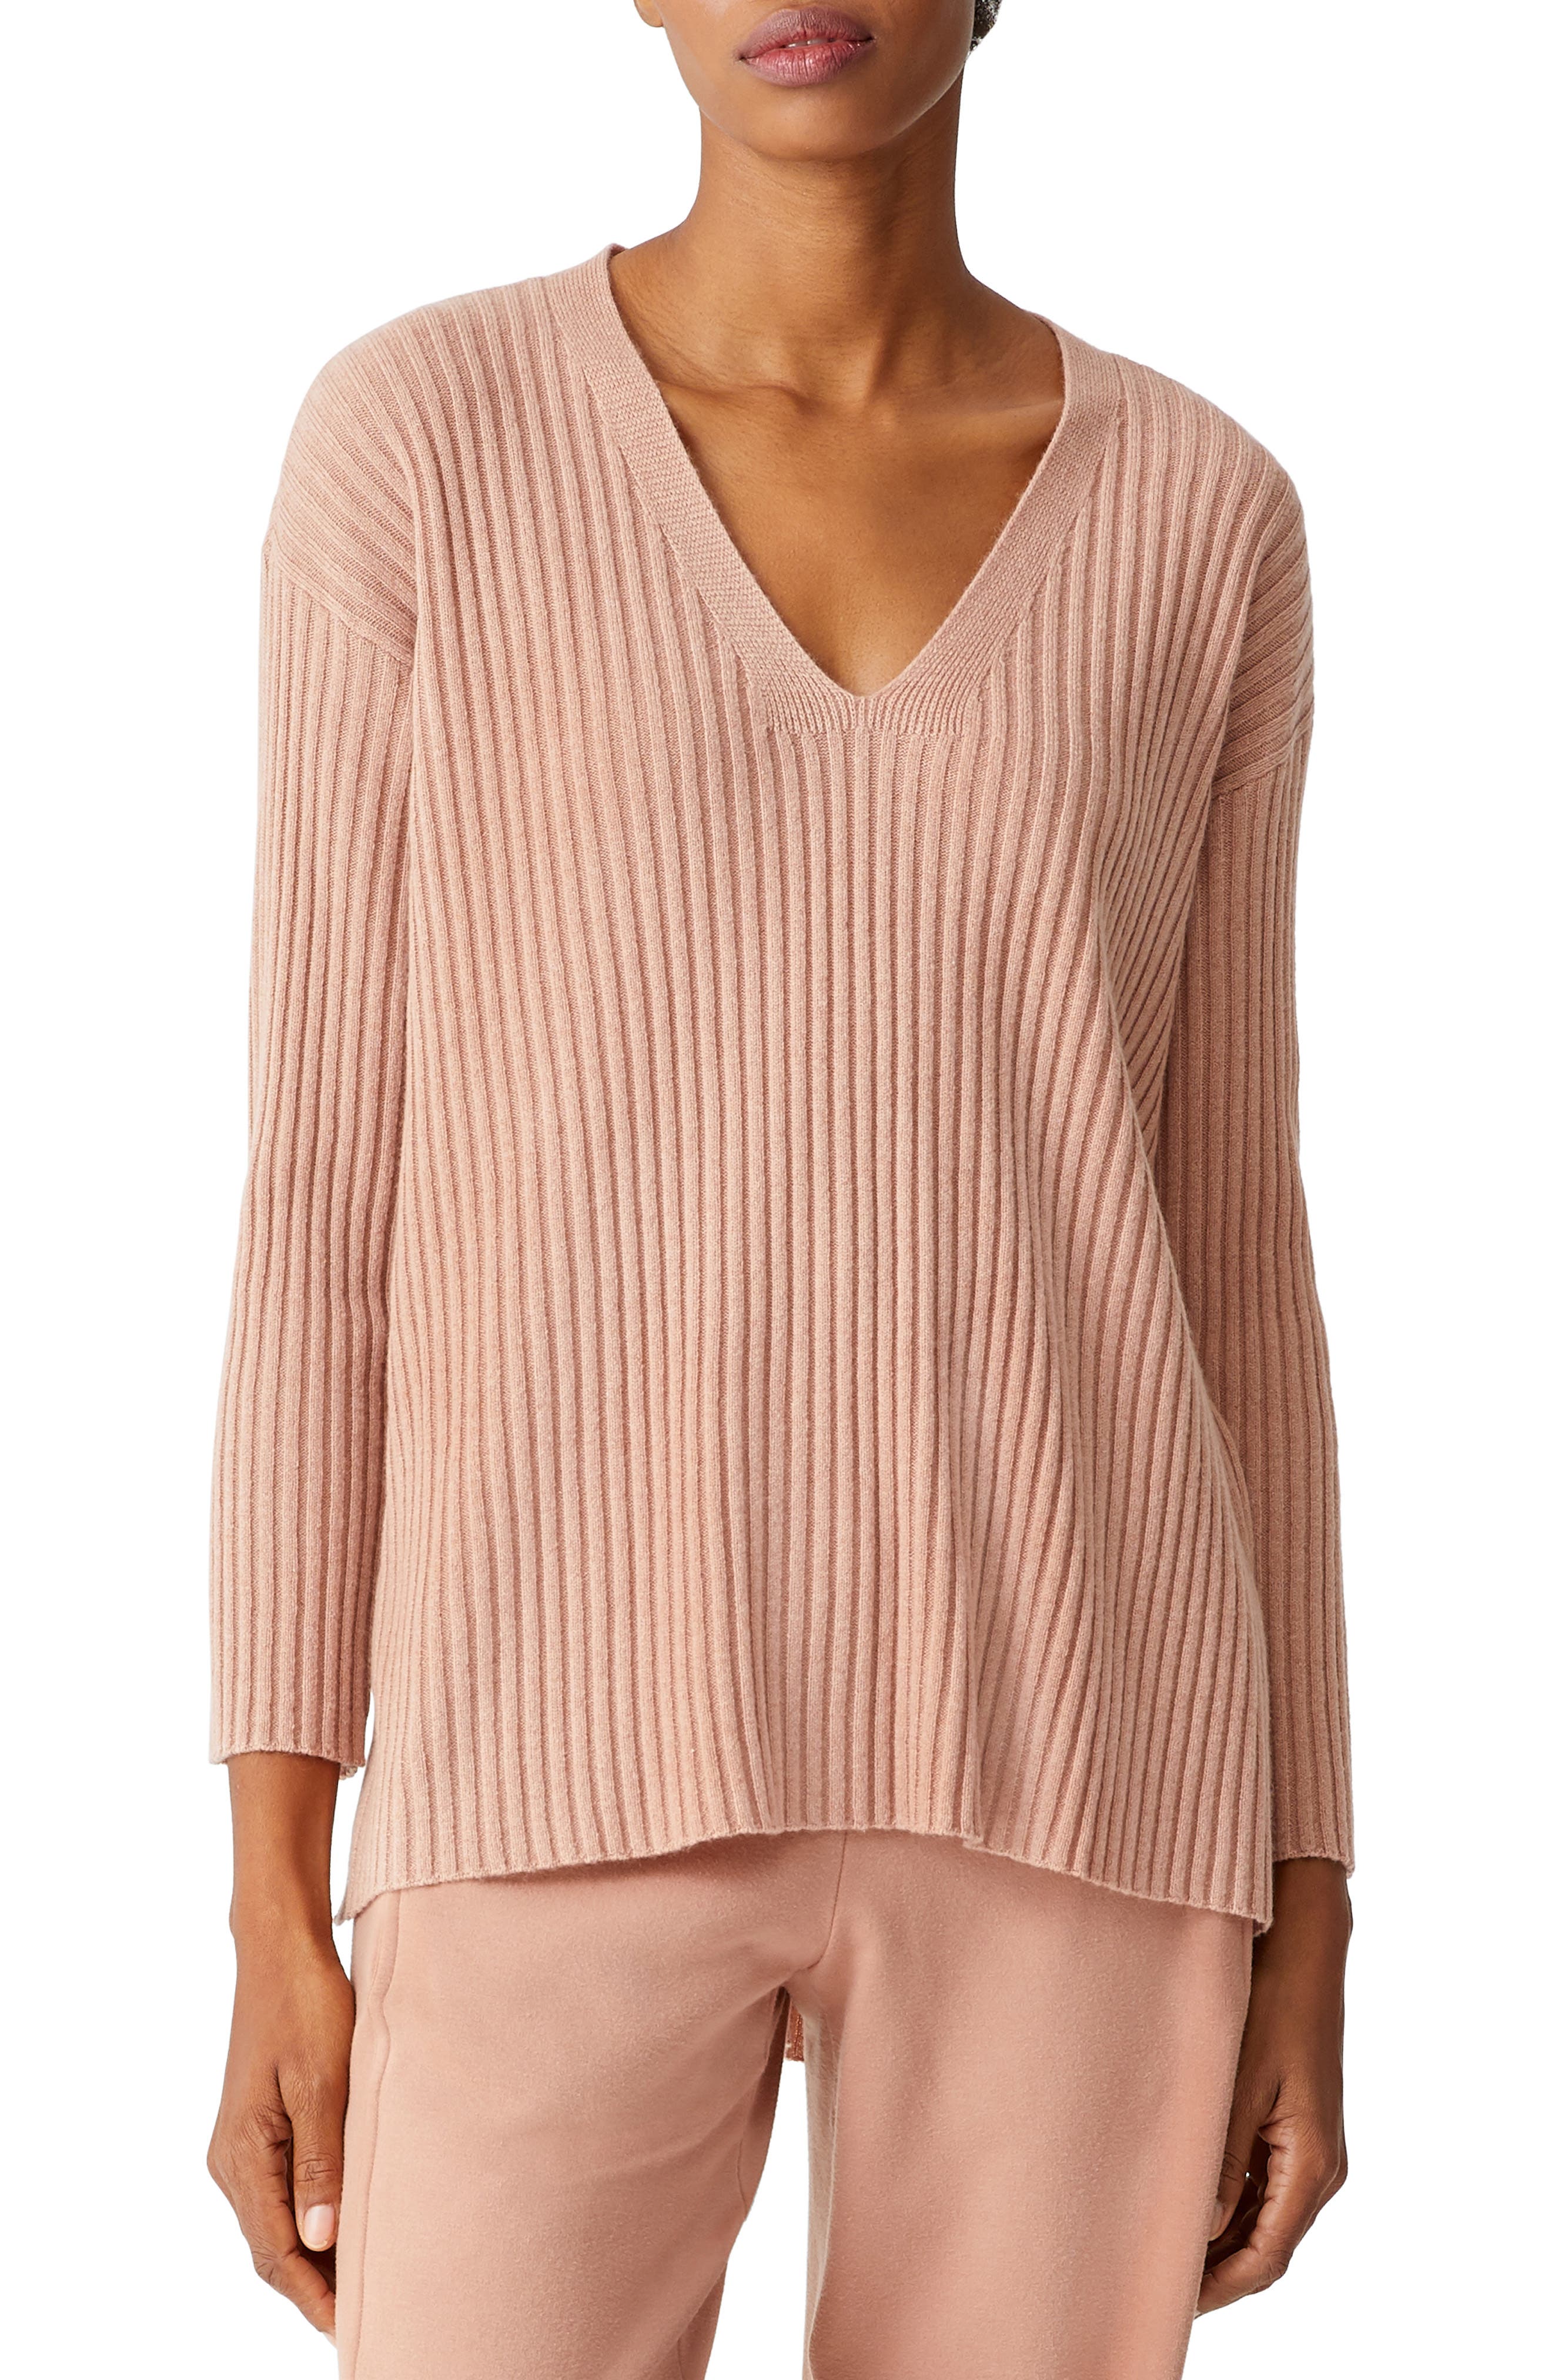 Eileen Fisher Womens Cashmere Boatneck Ribbed Top Shirt BHFO 2539